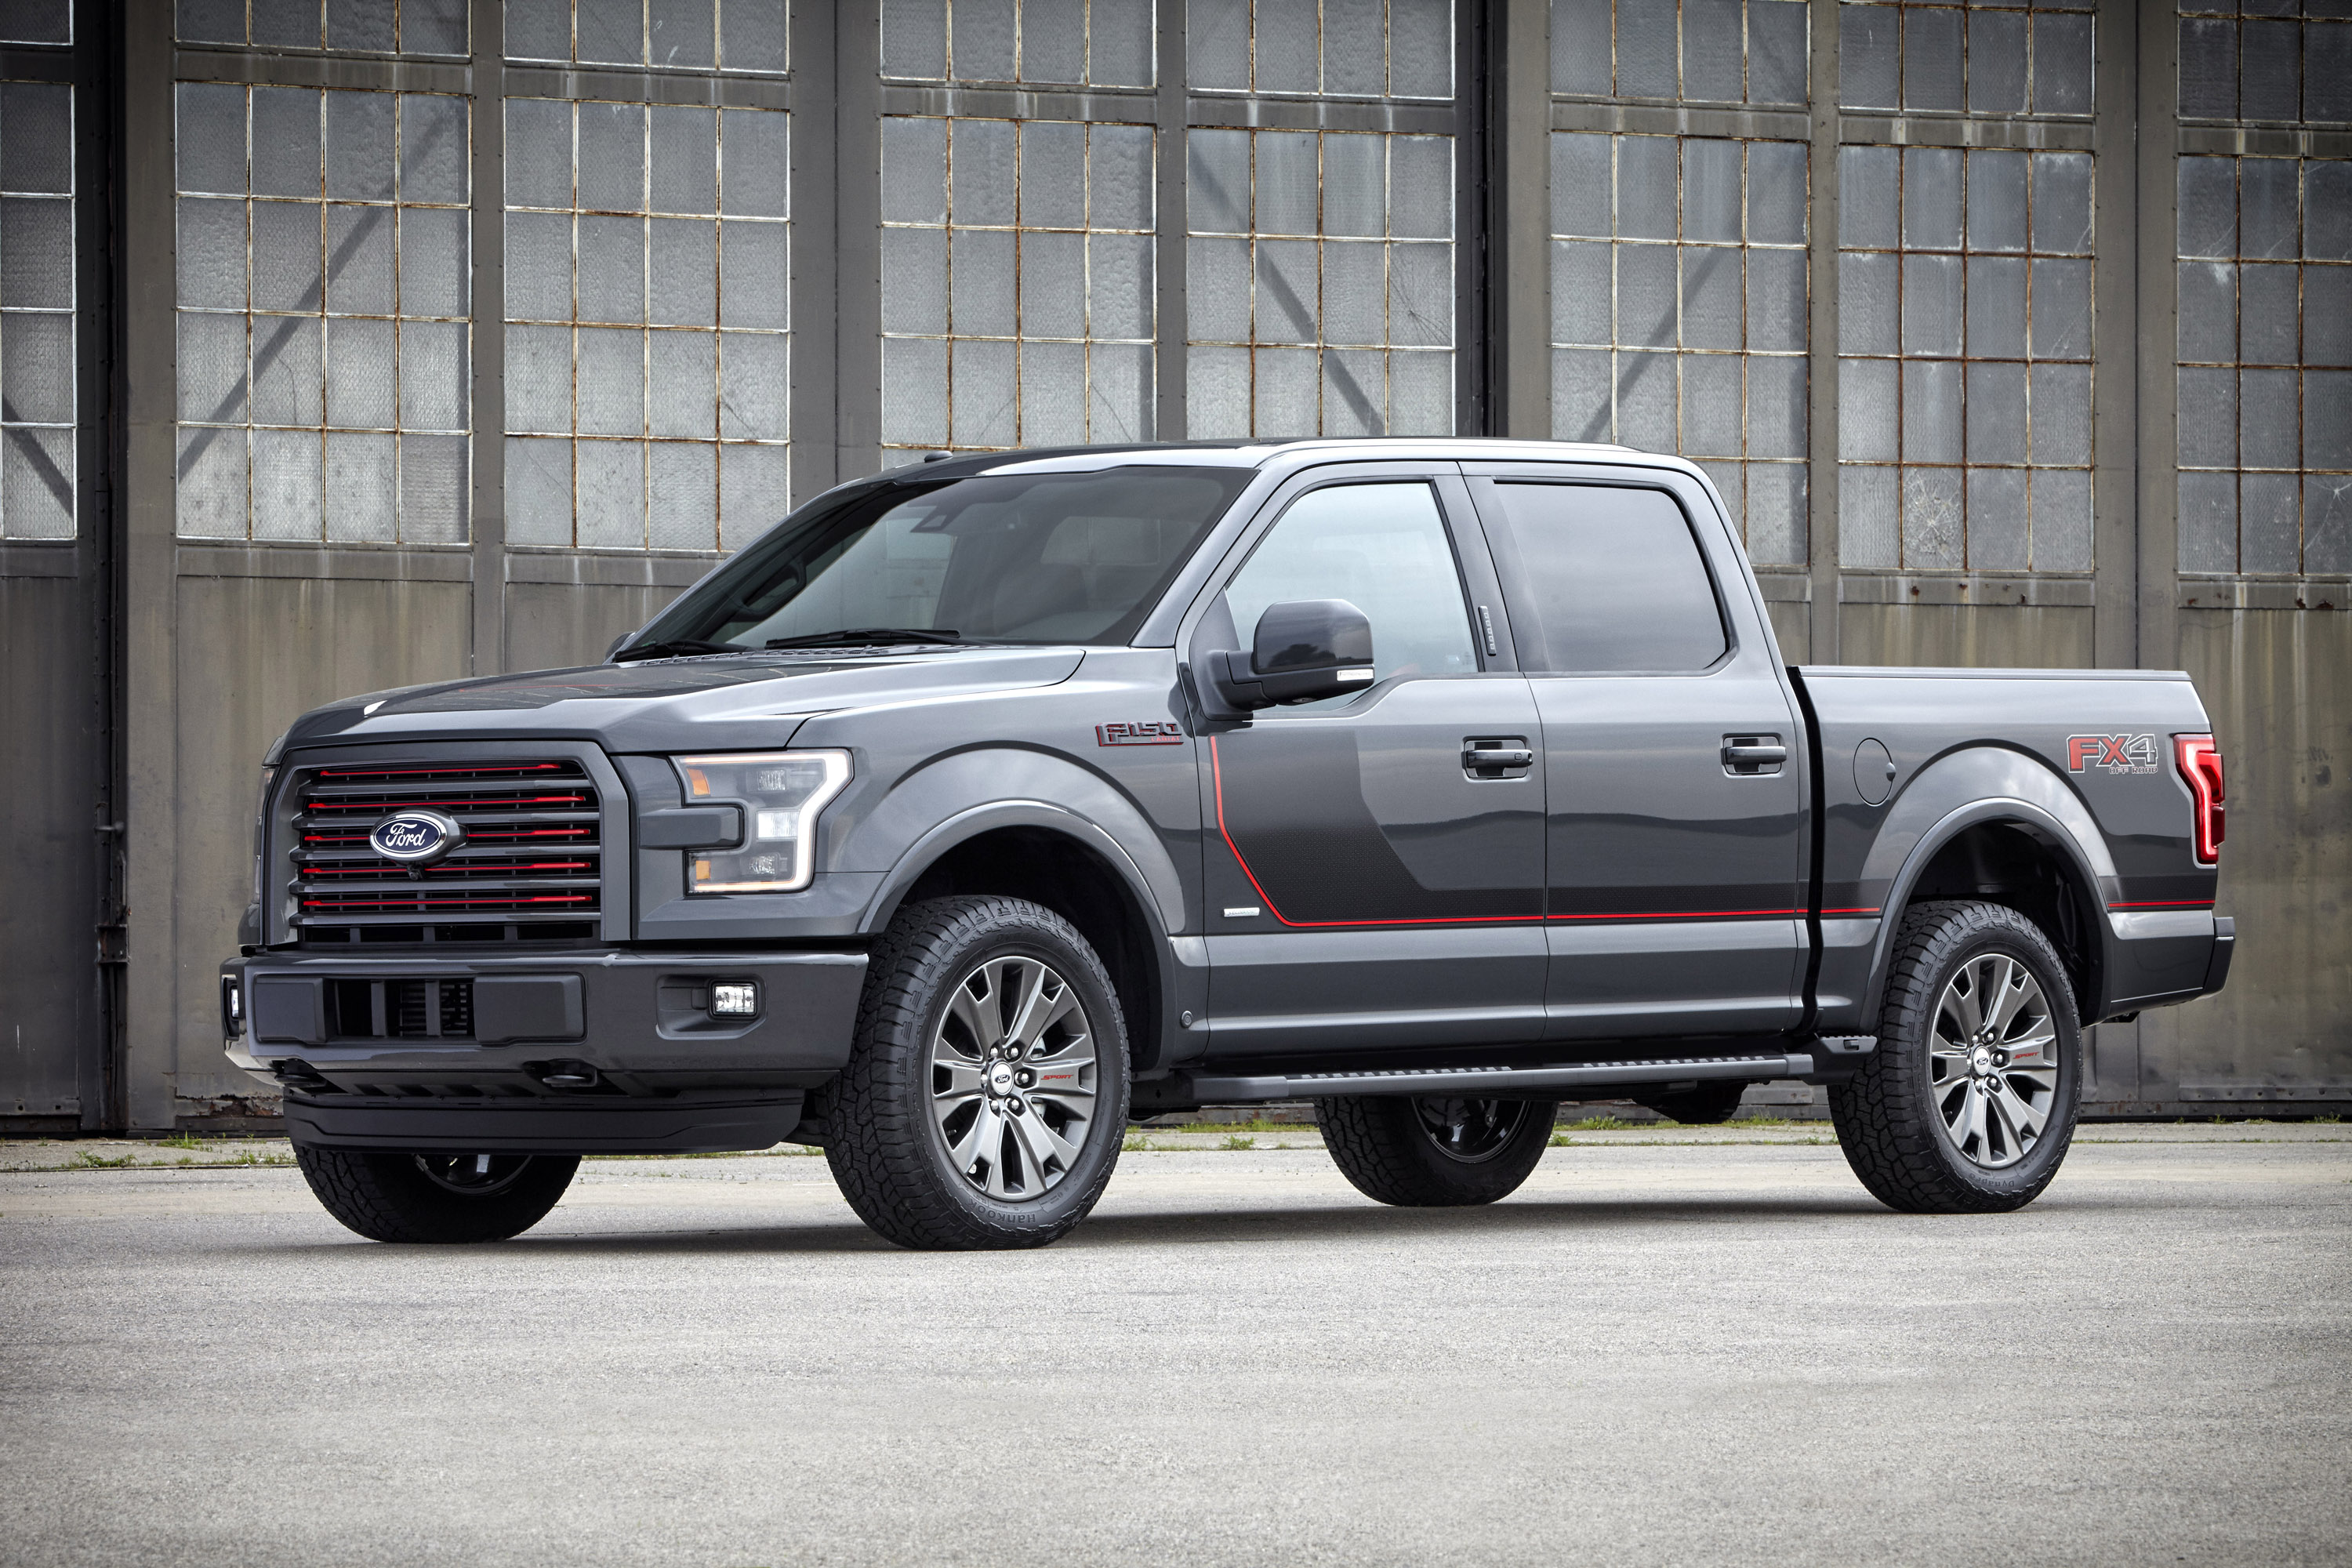 Ford F-150 Lariat Appearance Package